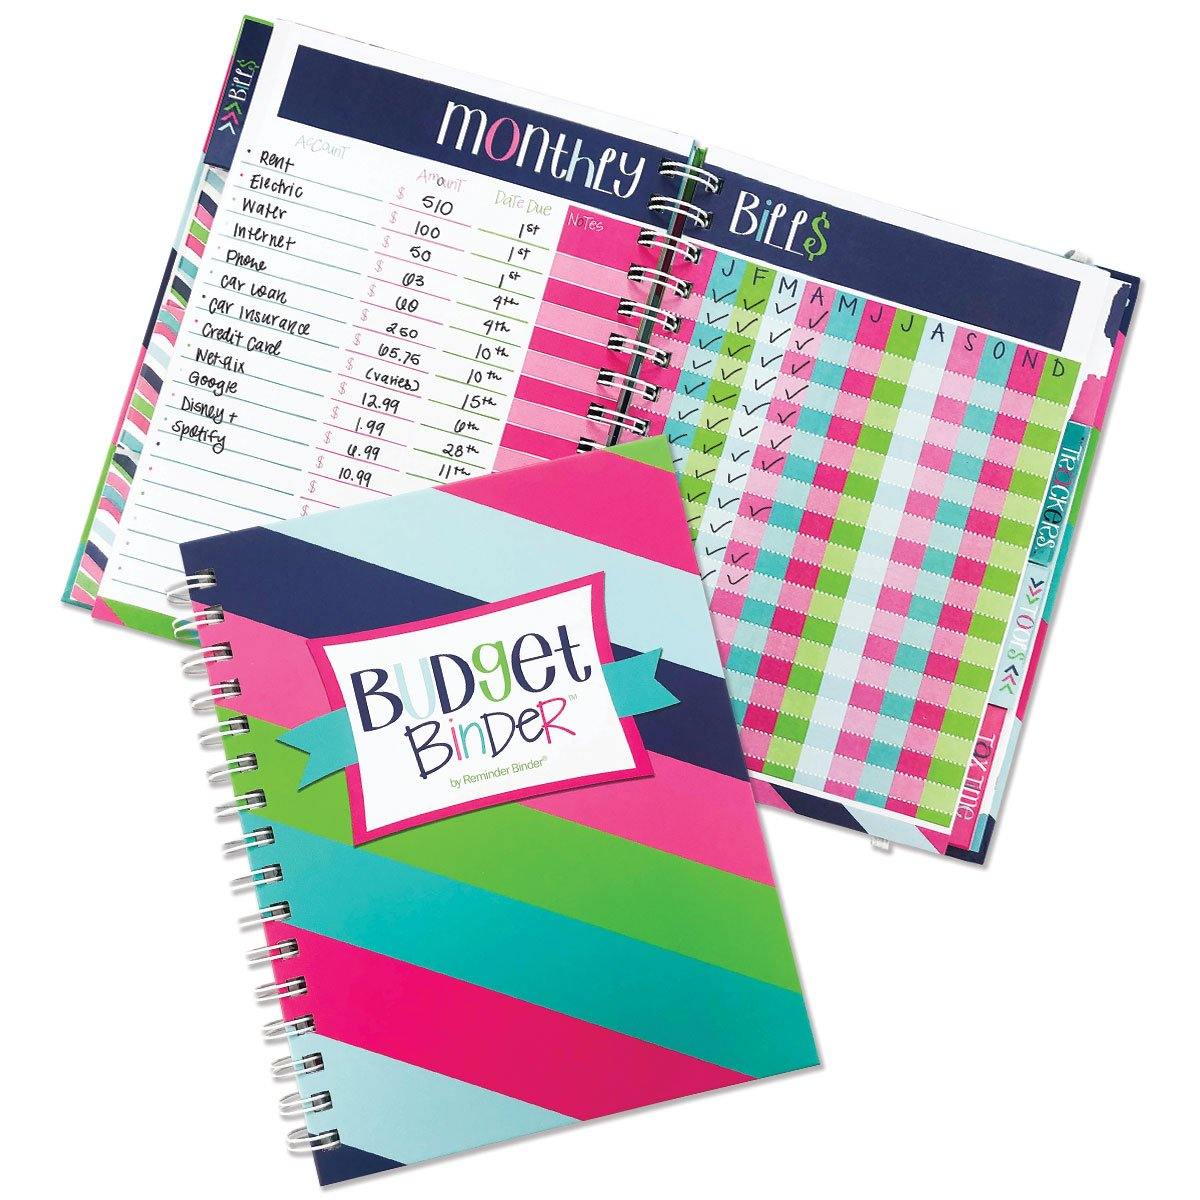 Lowest Price: Monthly Budget Planner - Expense Tracker Notebook, 12  Month Budget Book, Undated Bill Tracker & Finance Planner